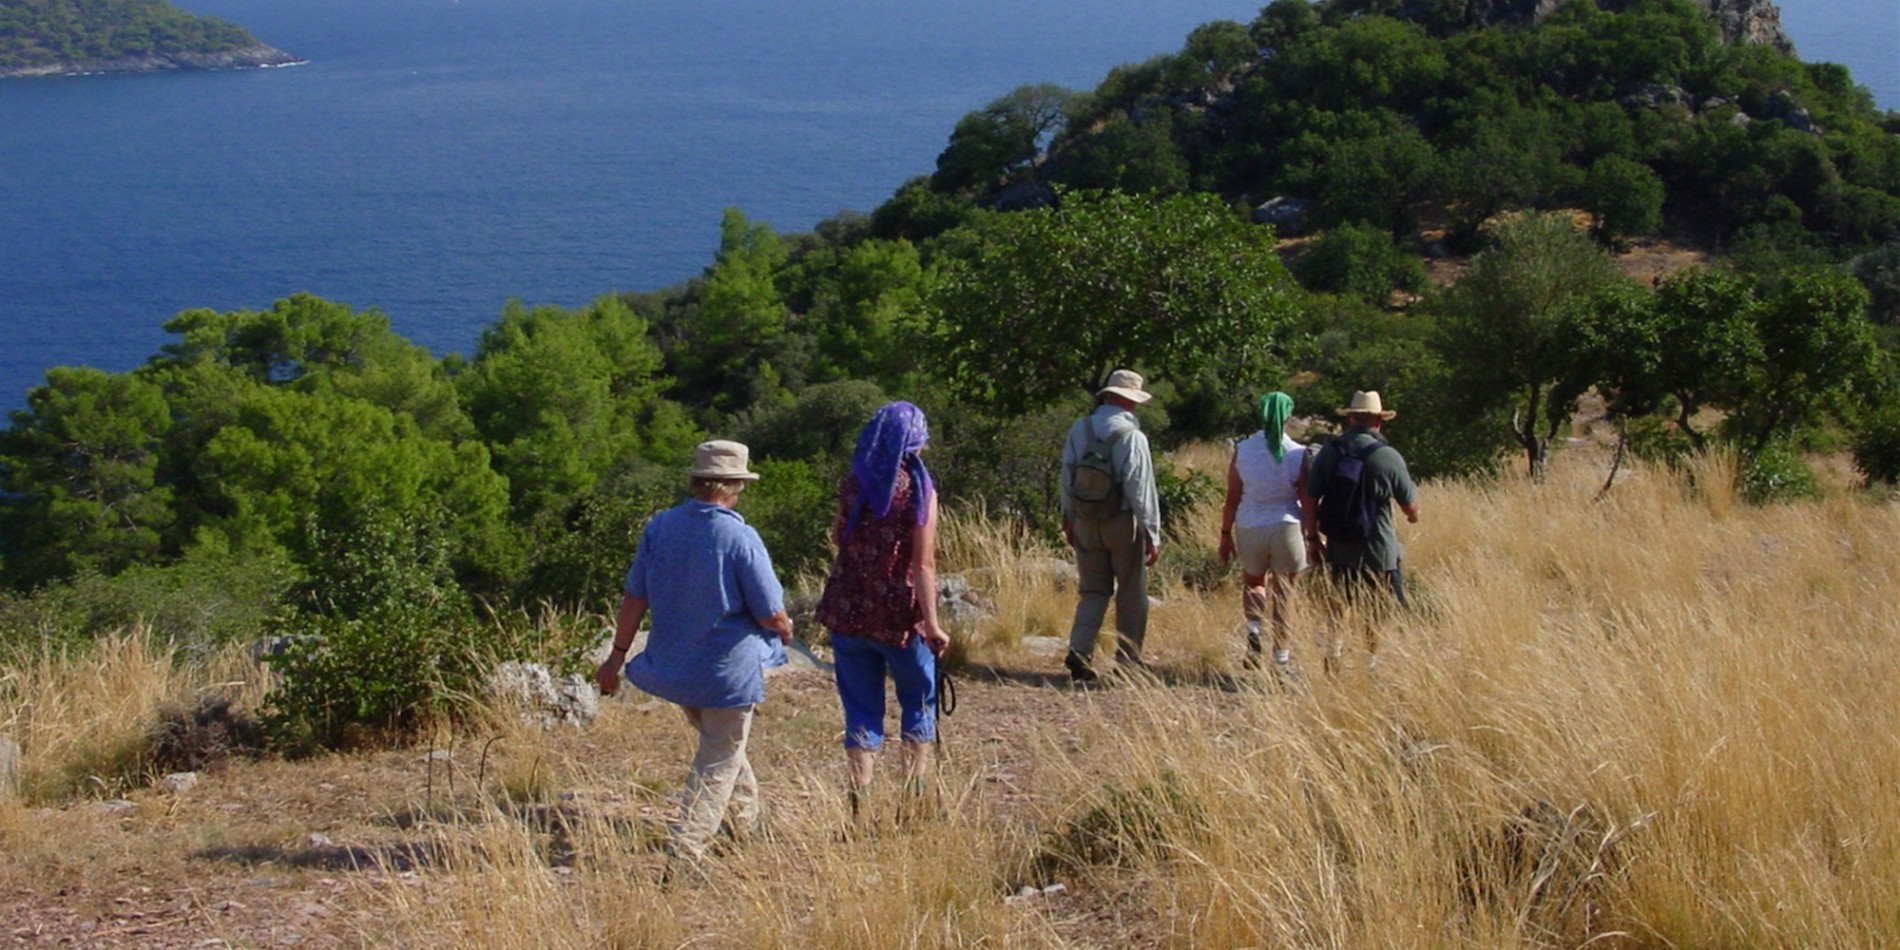 A group of people walking on a grassy hillside overlooking the Carian Coast in Turkey